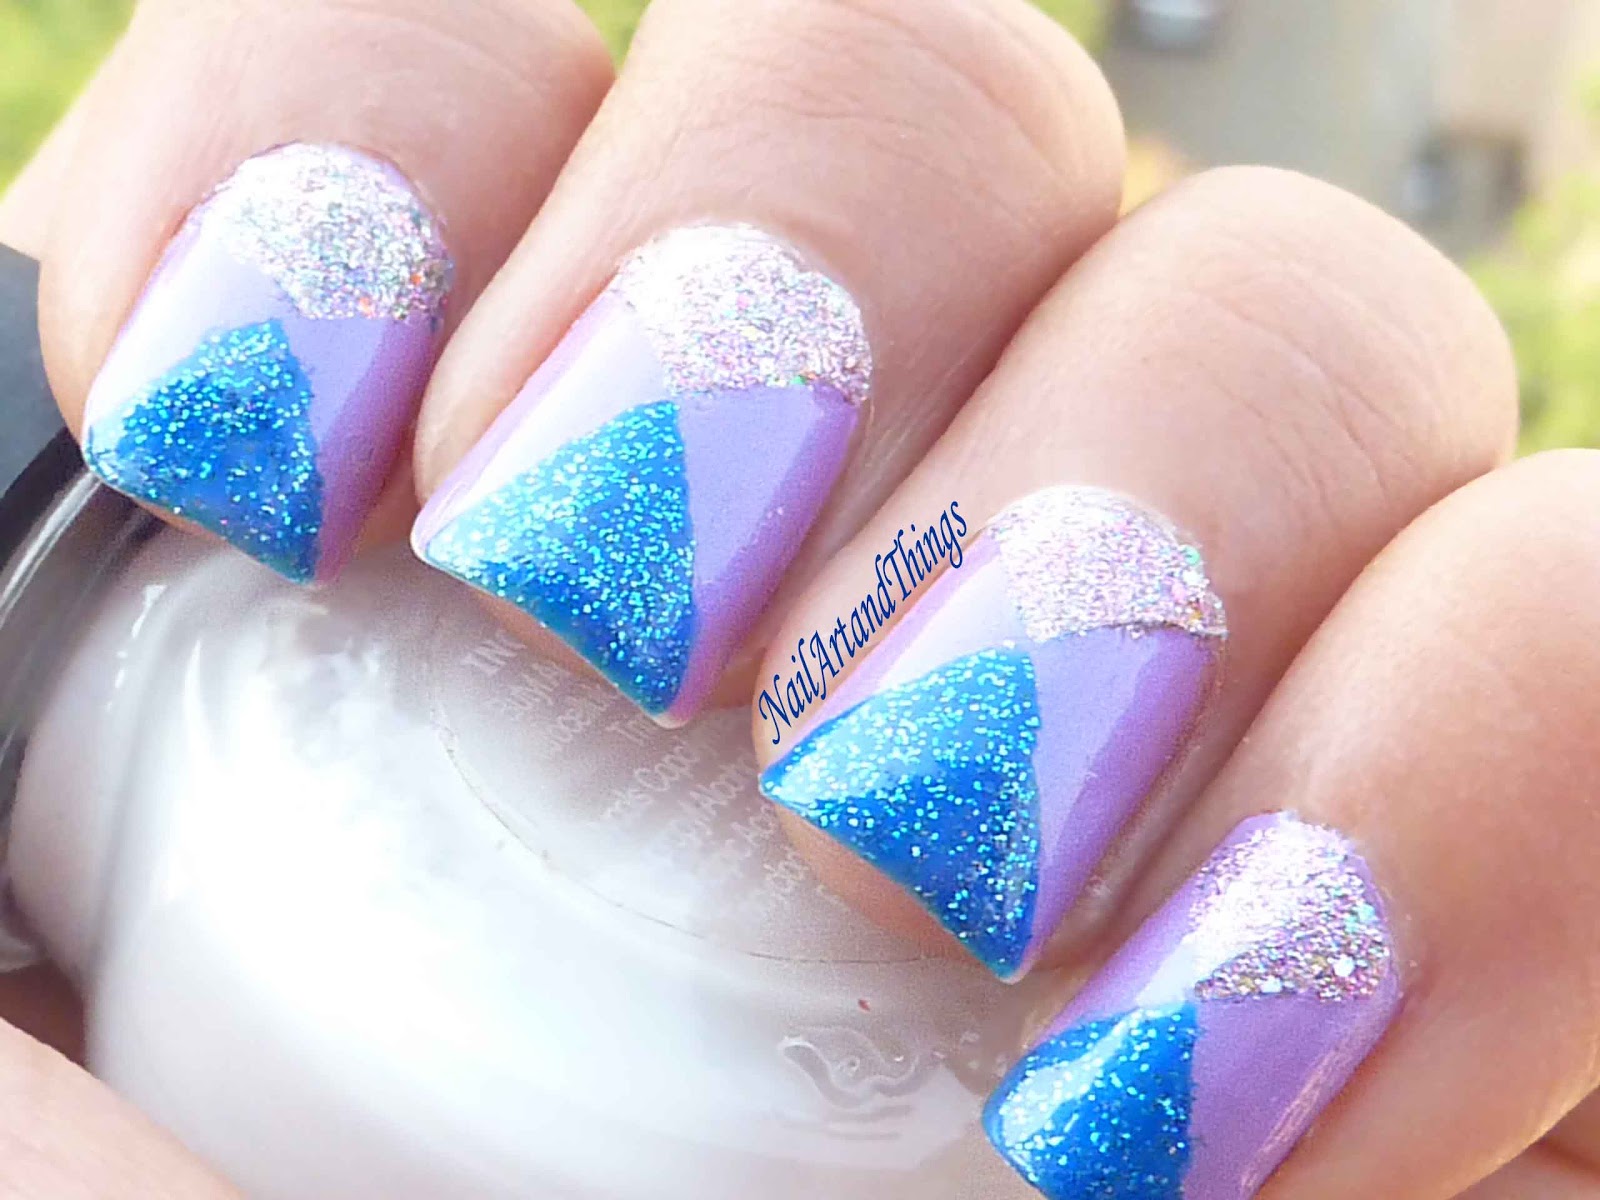 7. Beautiful Nail Art Designs You Can Do Yourself - wide 11